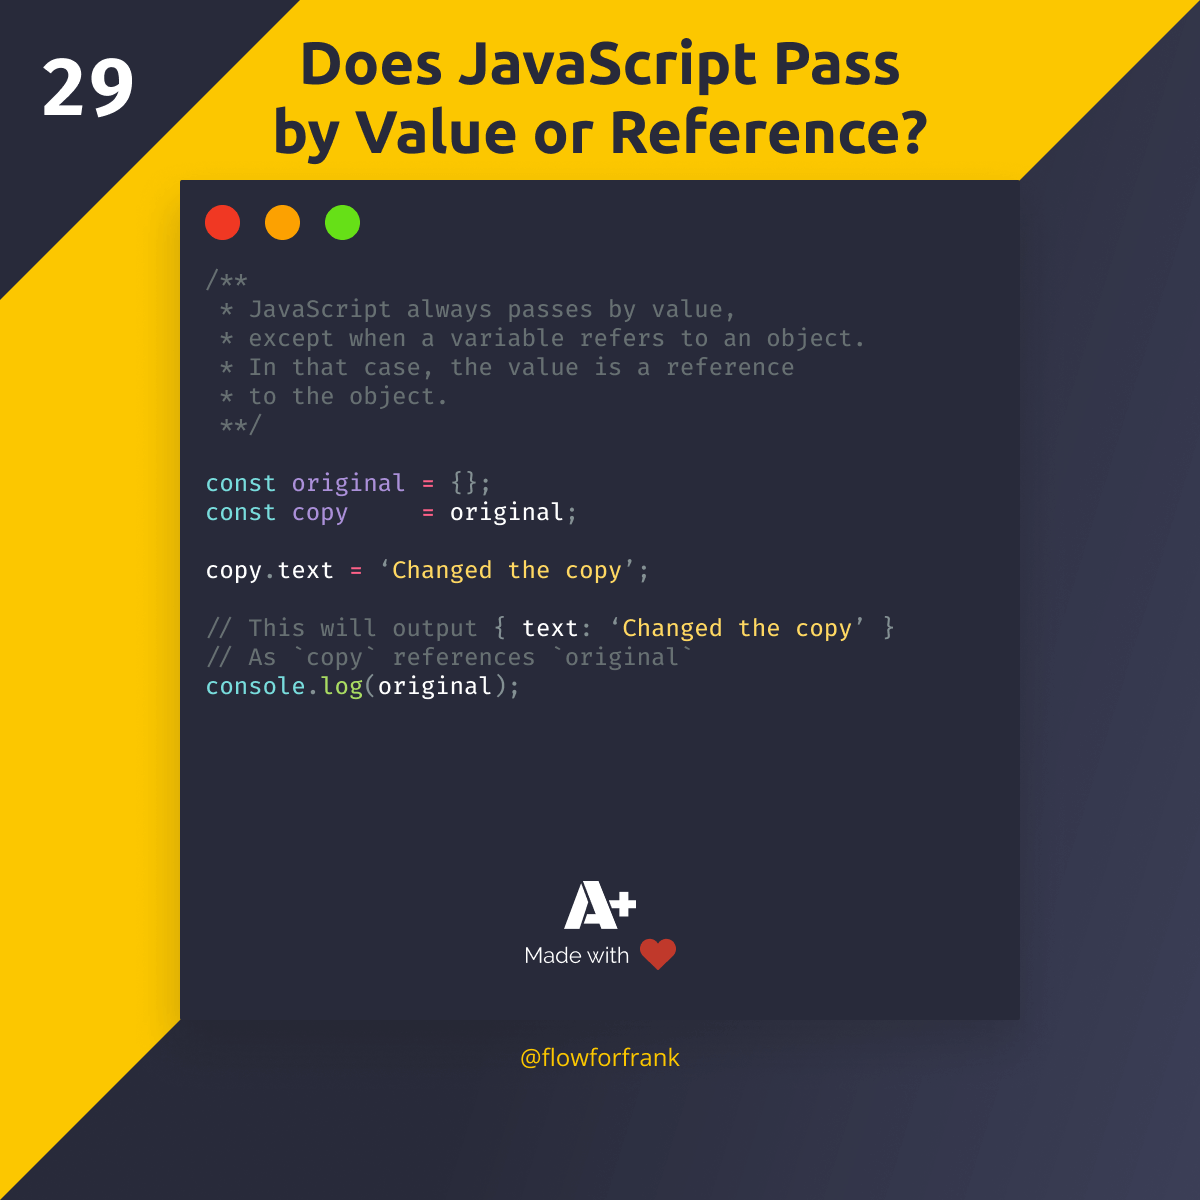 Does JavaScript Pass by Value or Reference?